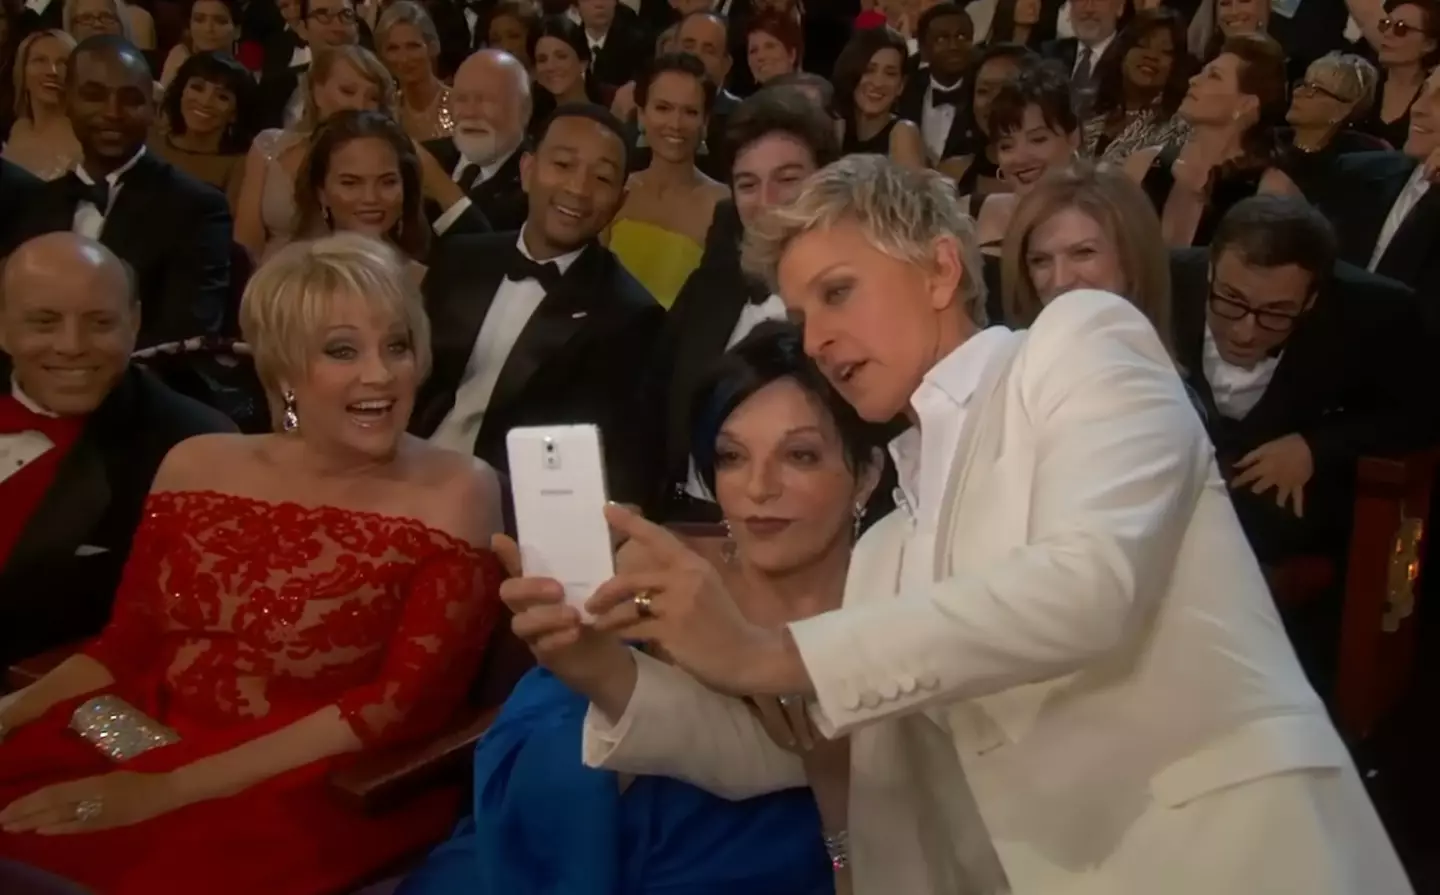 Liza Minnelli was too short to squeeze in behind the A-listers.